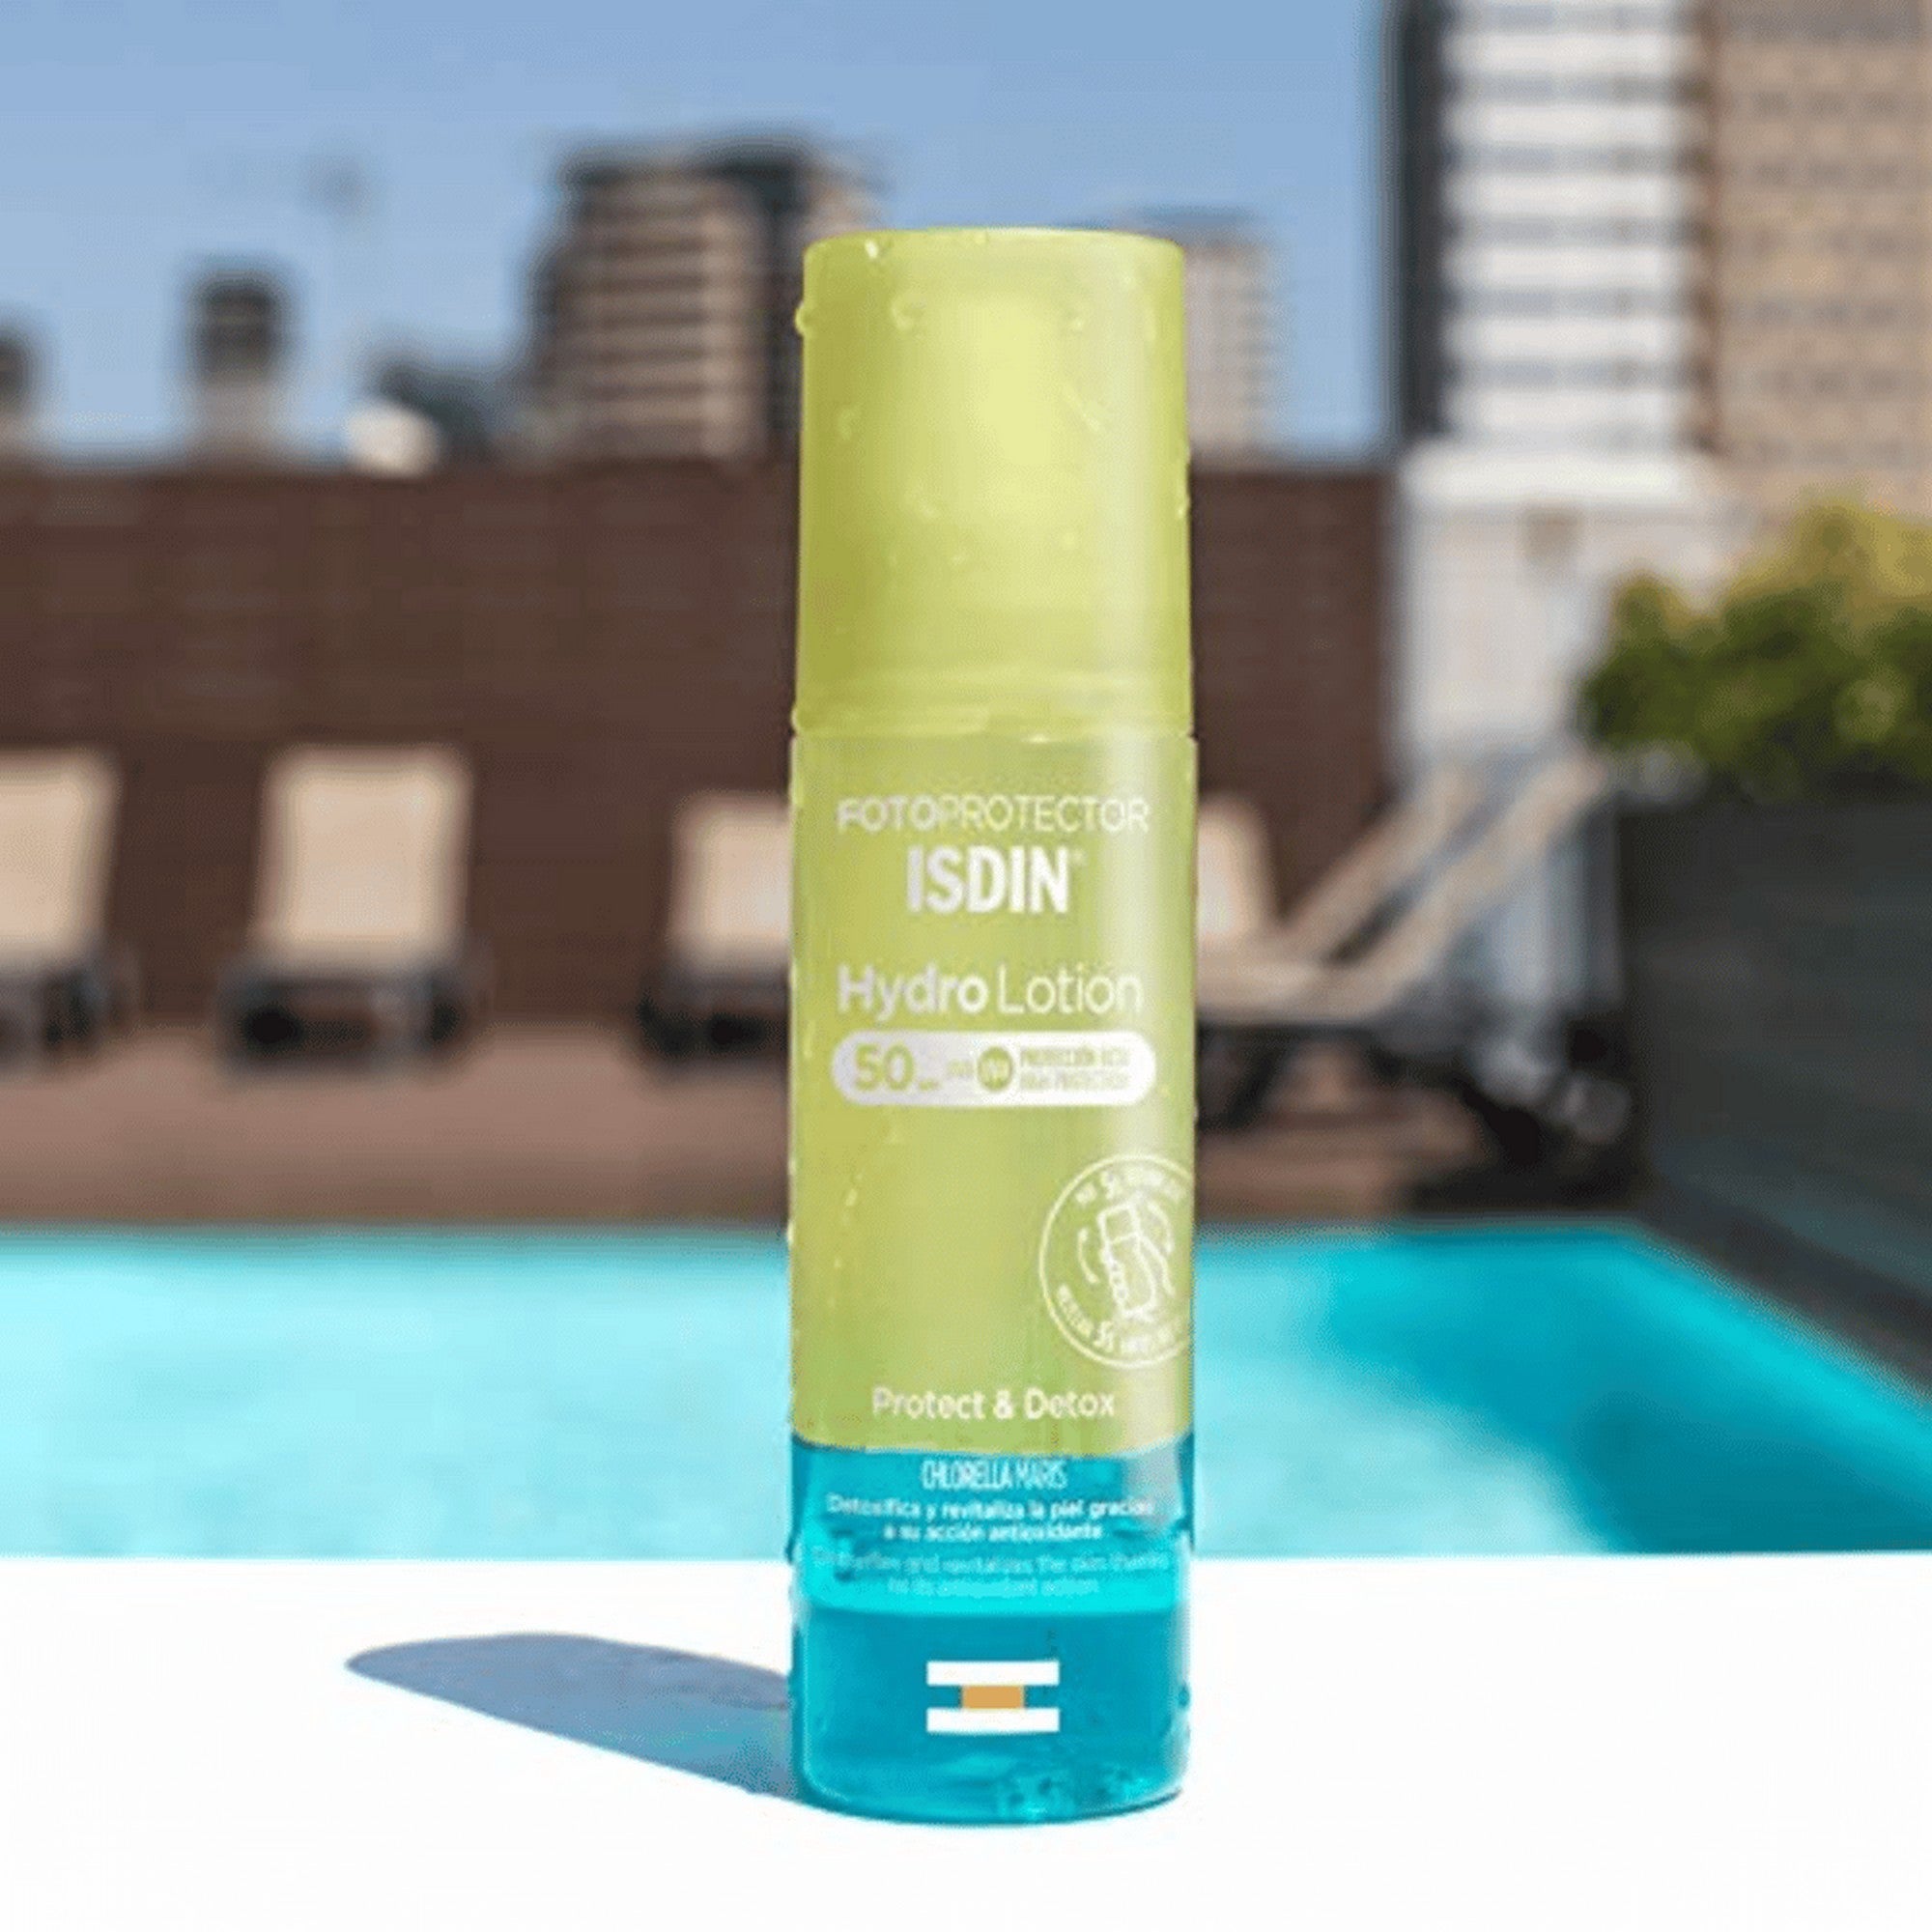 ISDIN Fotoprotector Hydro Lotion by the pool